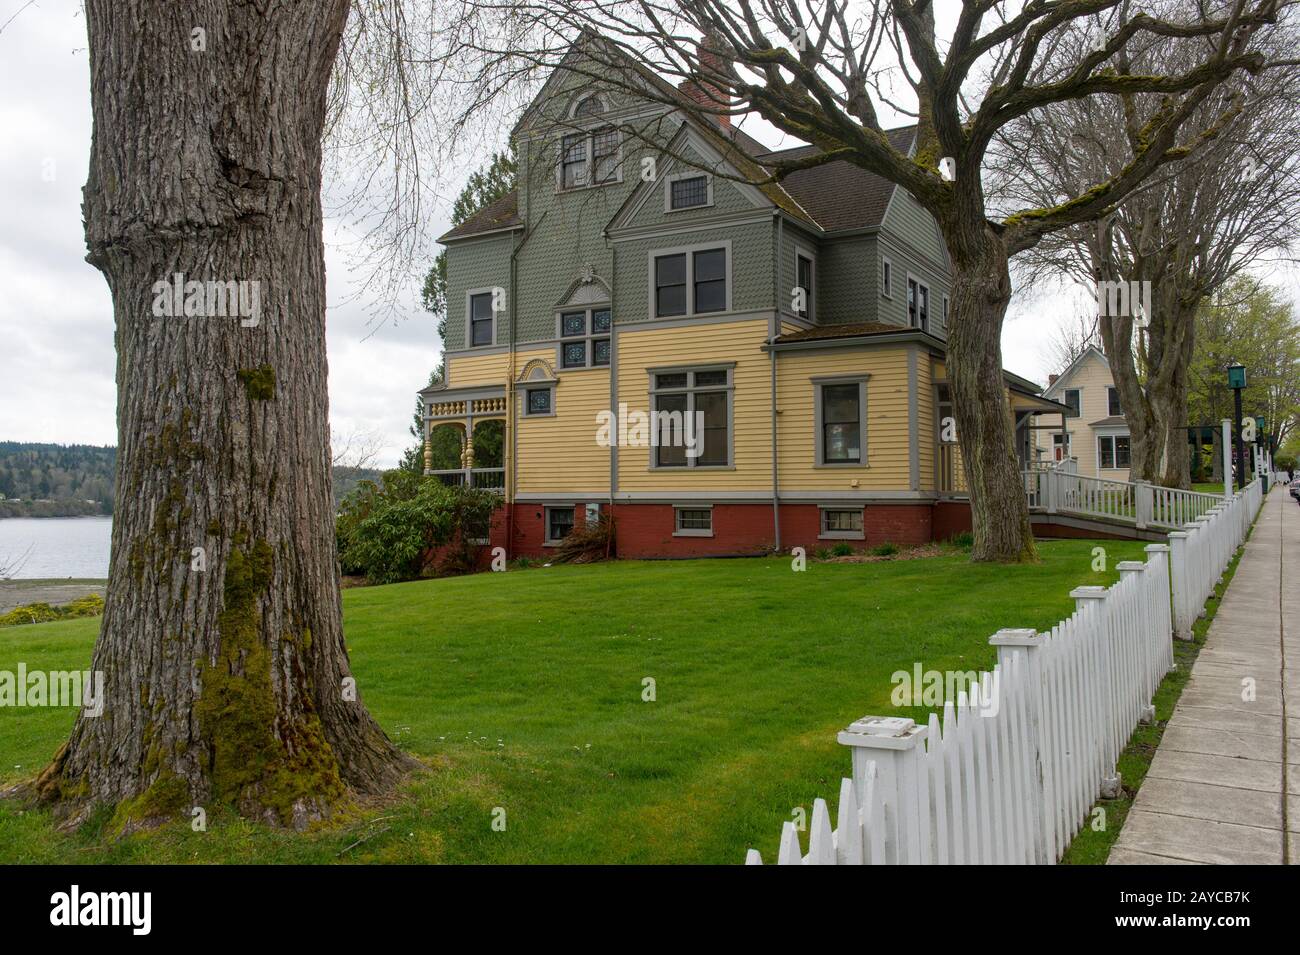 View of the Walker-Ames House in Port Gamble, a National Historic Landmark, in Kitsap County, Washington State, USA. Stock Photo